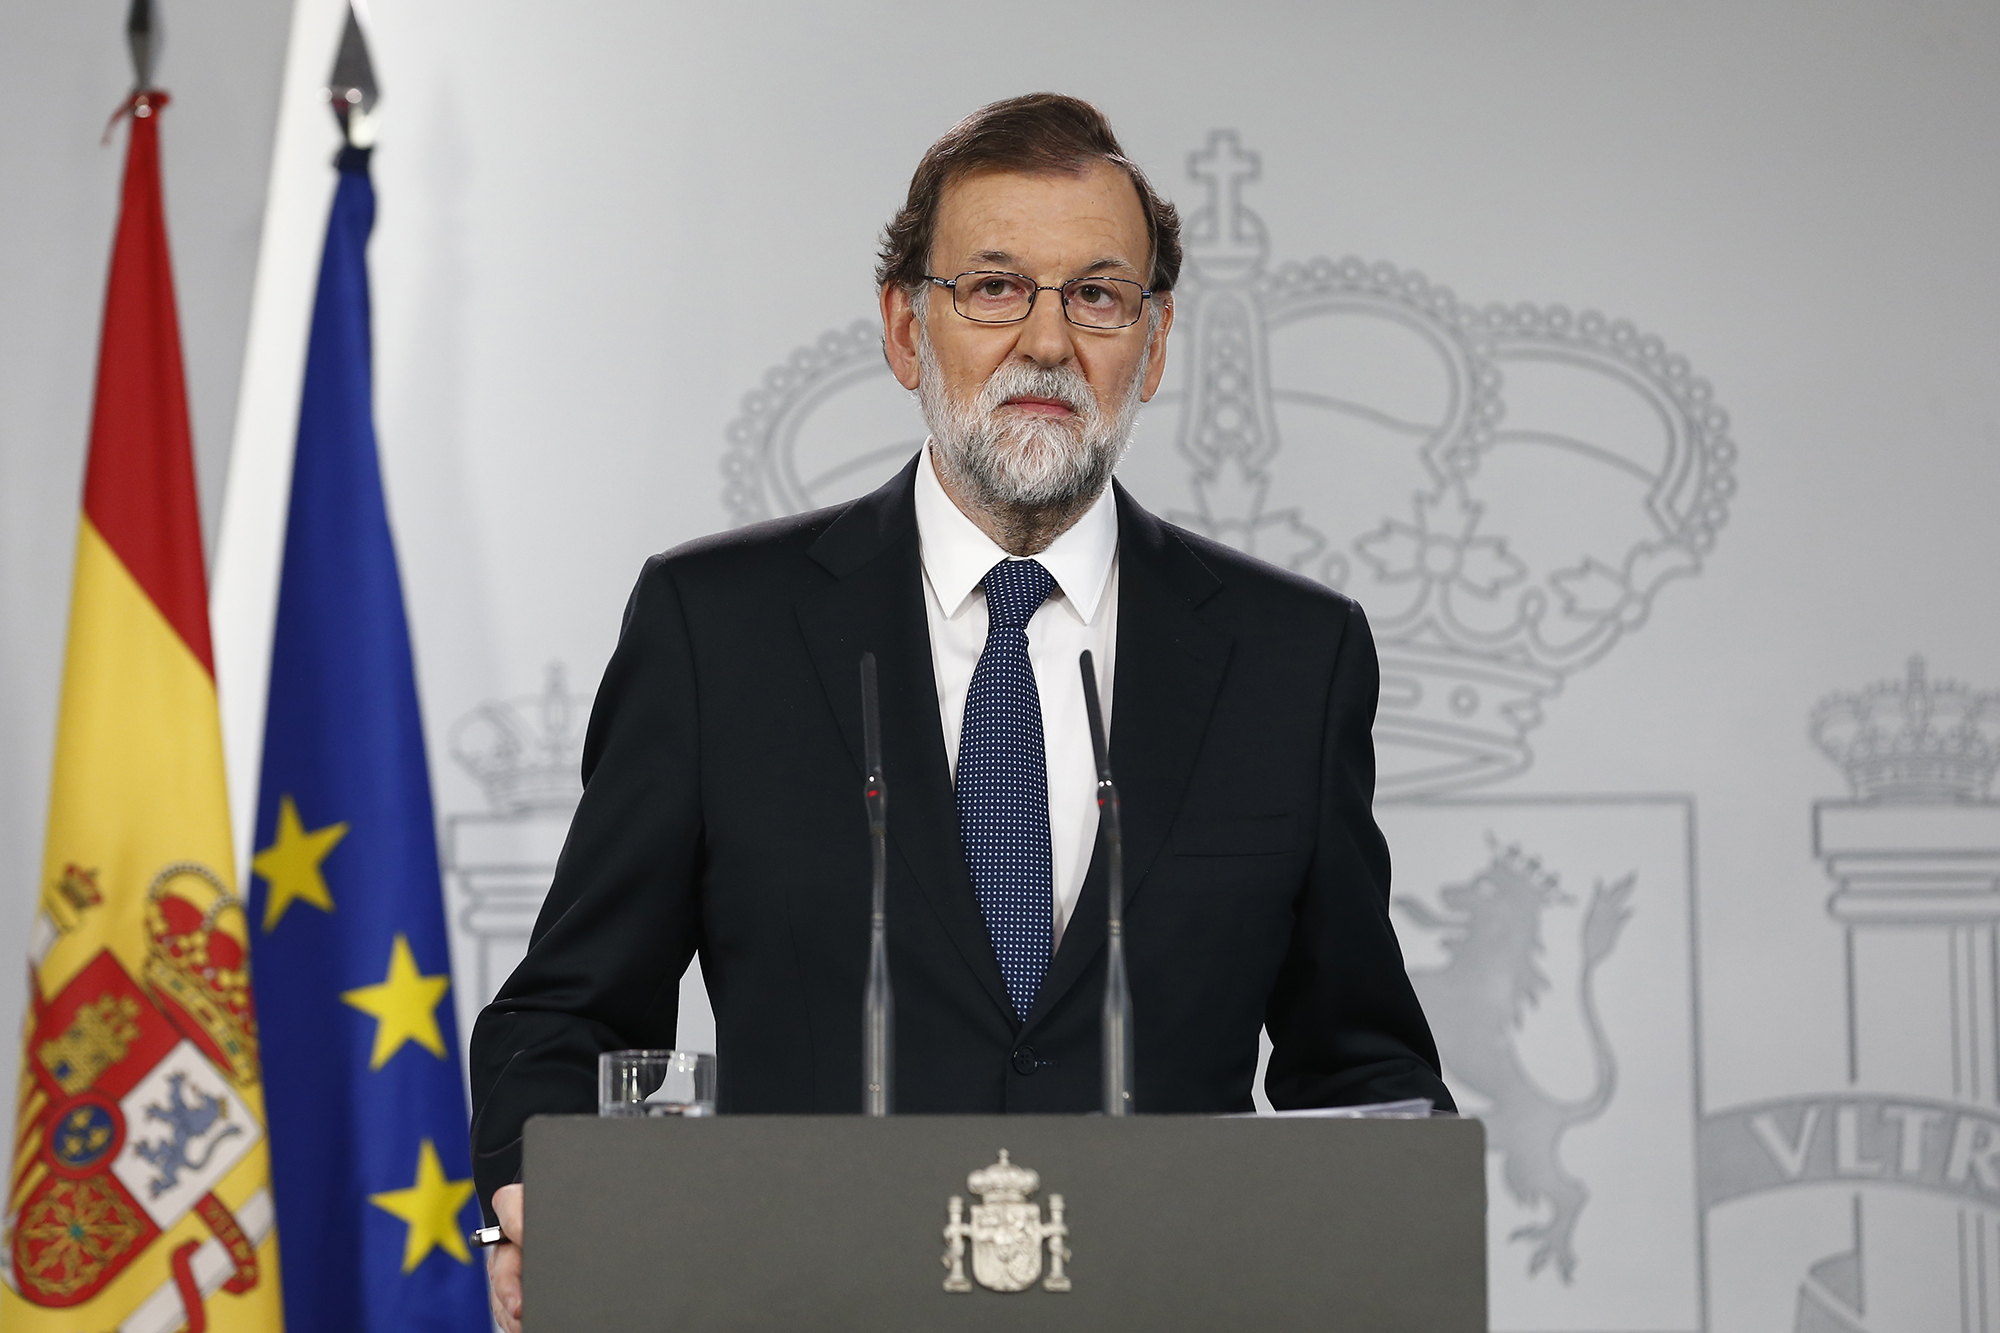 Mariano Rajoy speaking at a press conference on Sunday (by ACN)